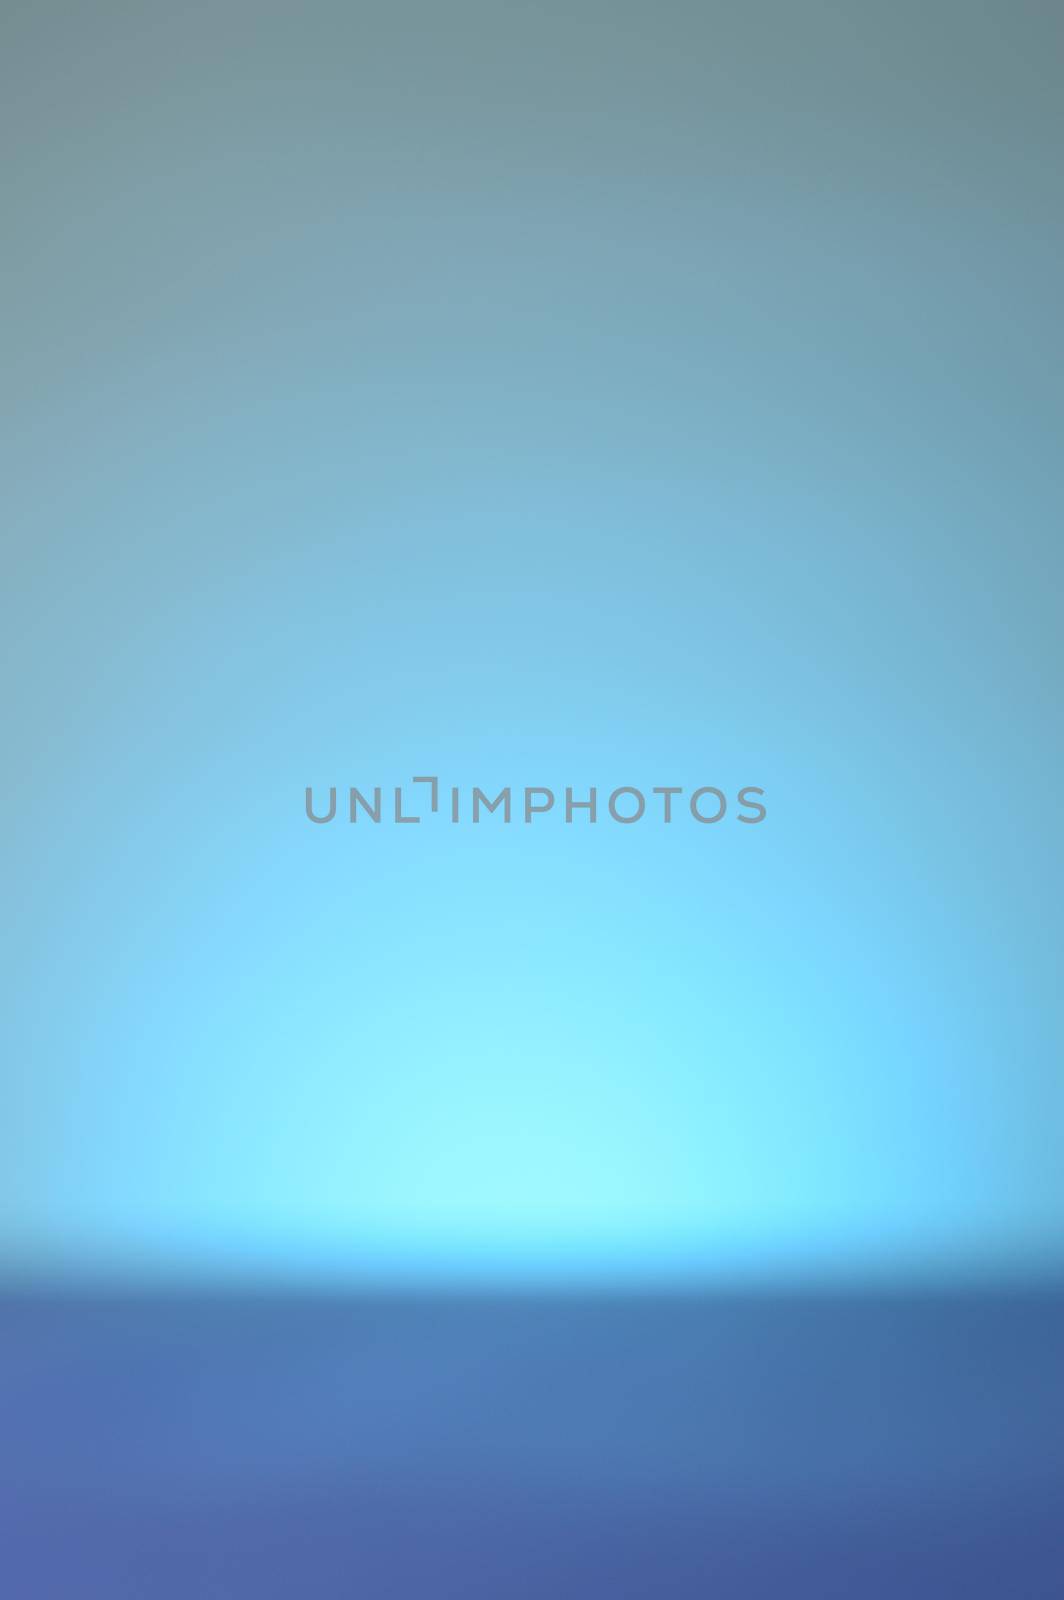 An abstract blue blurred background for use in design work or page layouts.